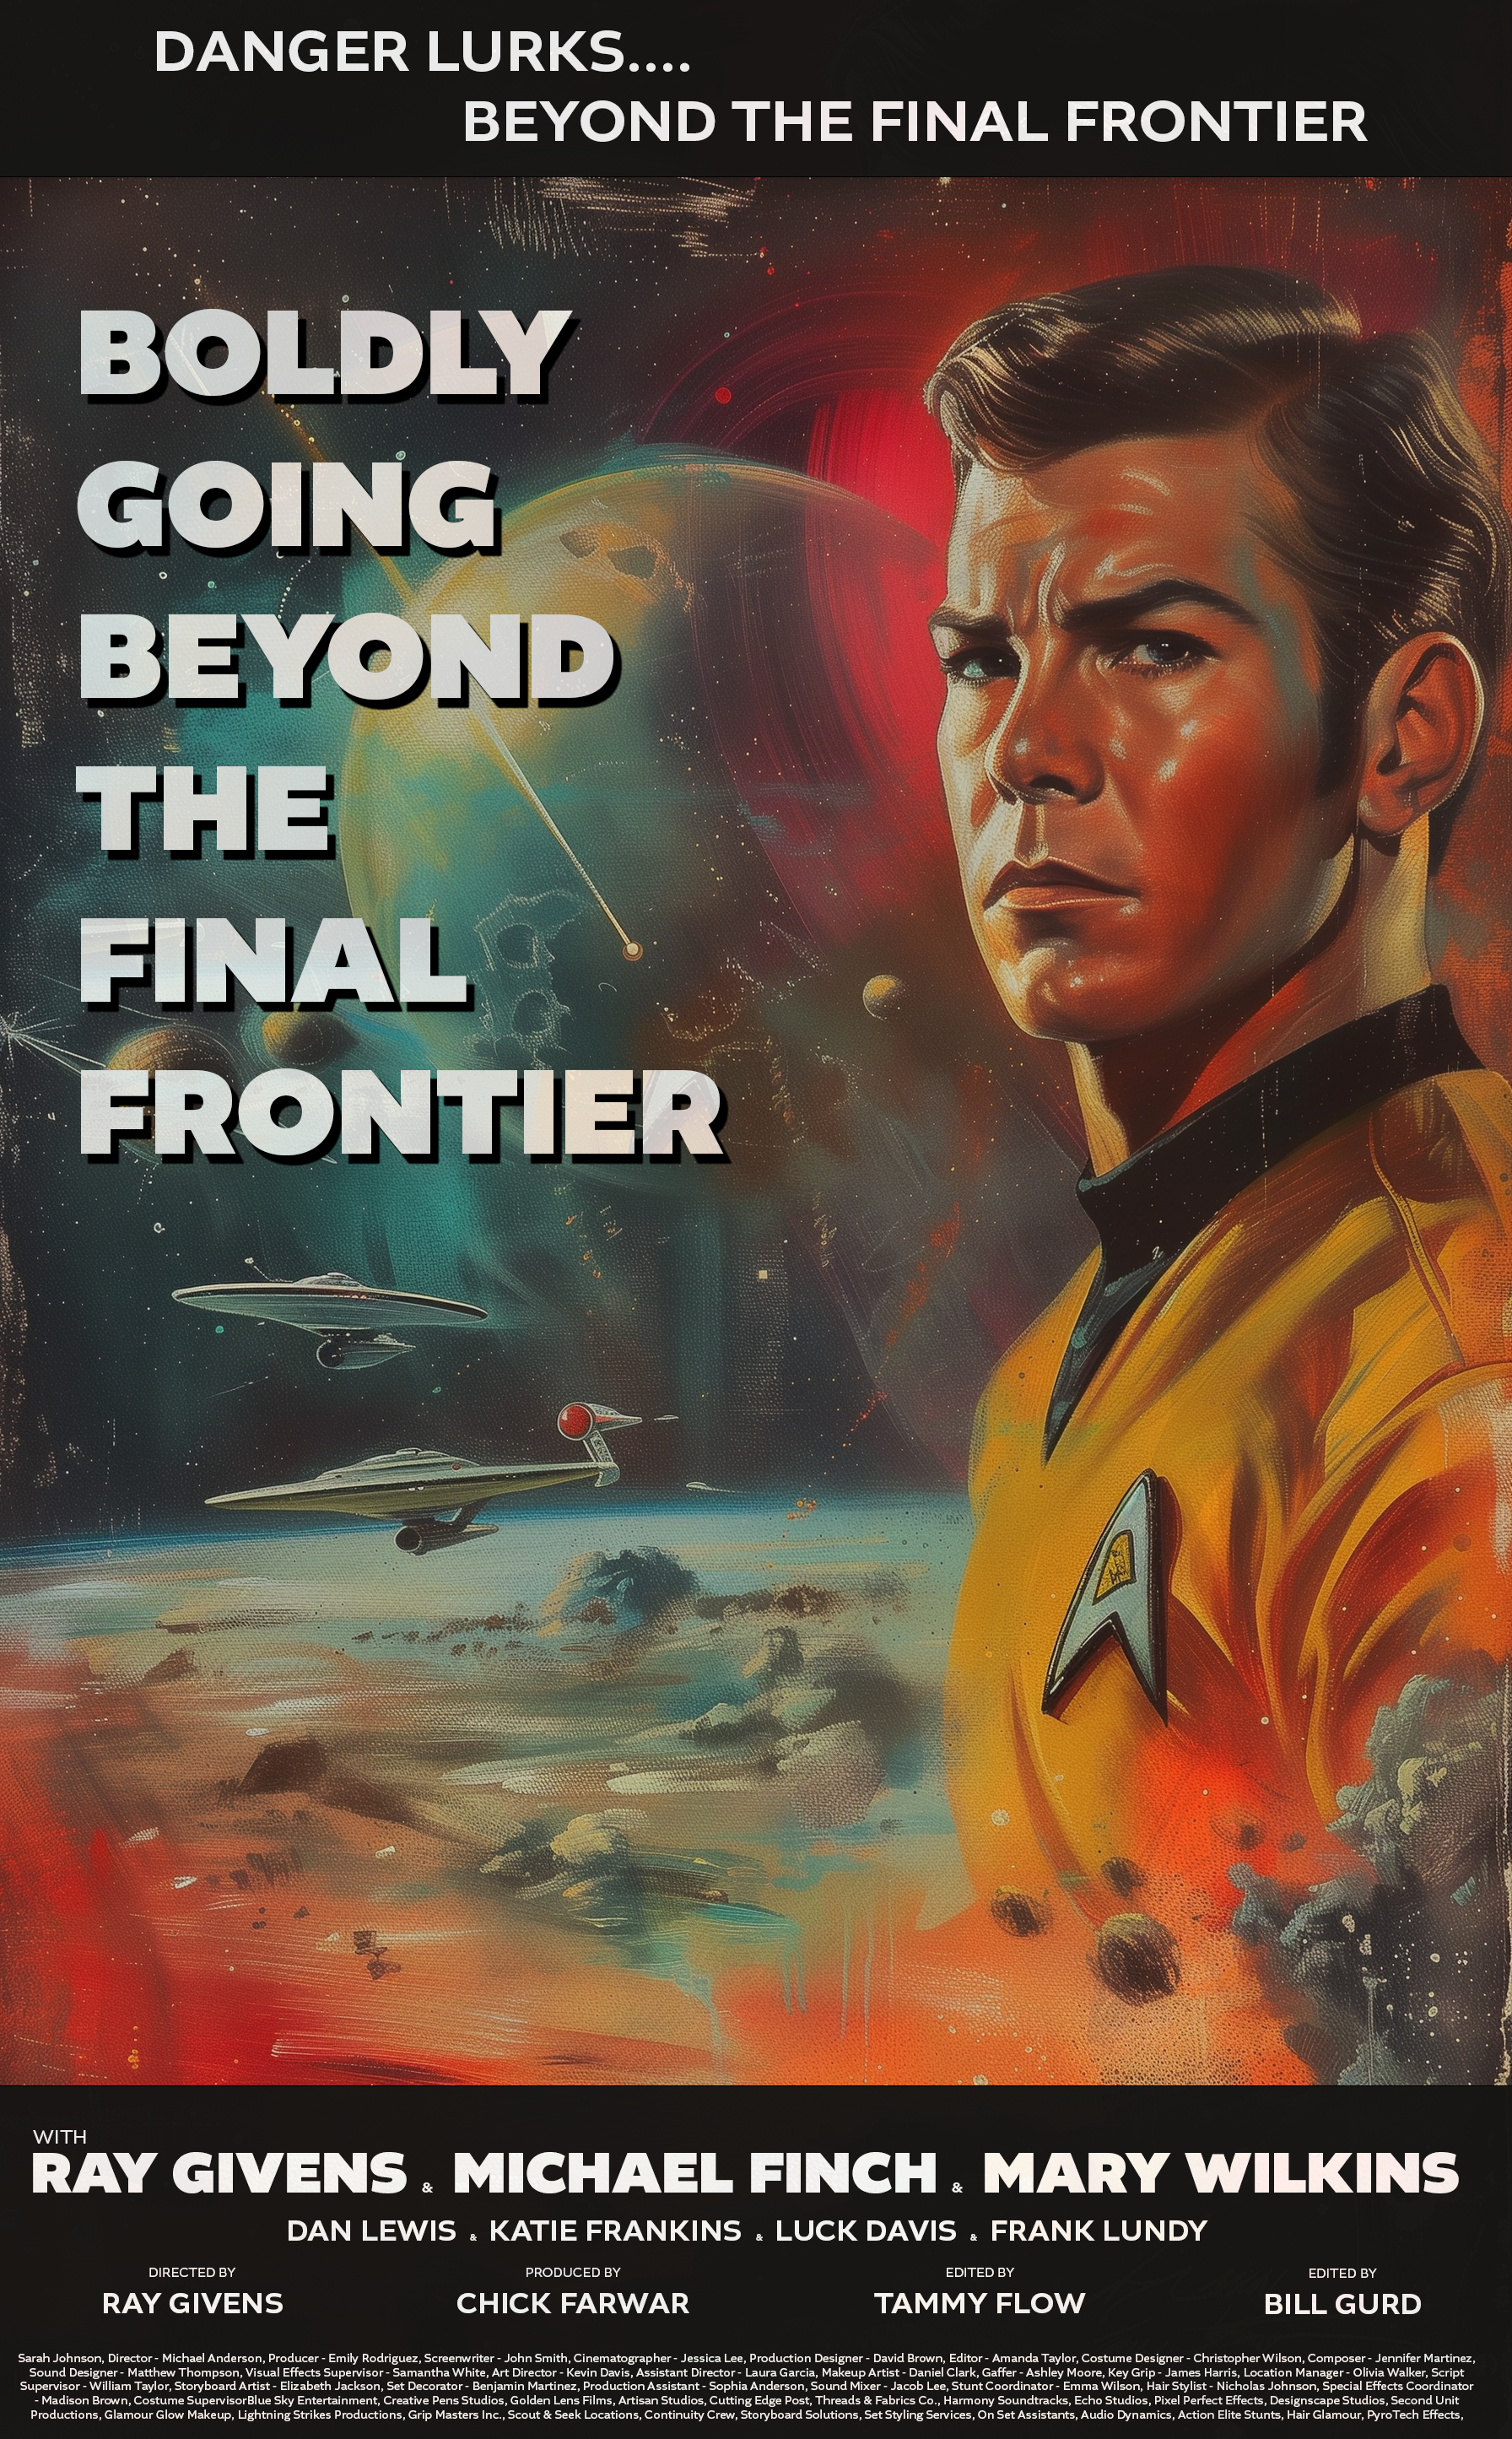 Name:  Beyond the Final Frontier.png
Views: 67
Size:  8.19 MB